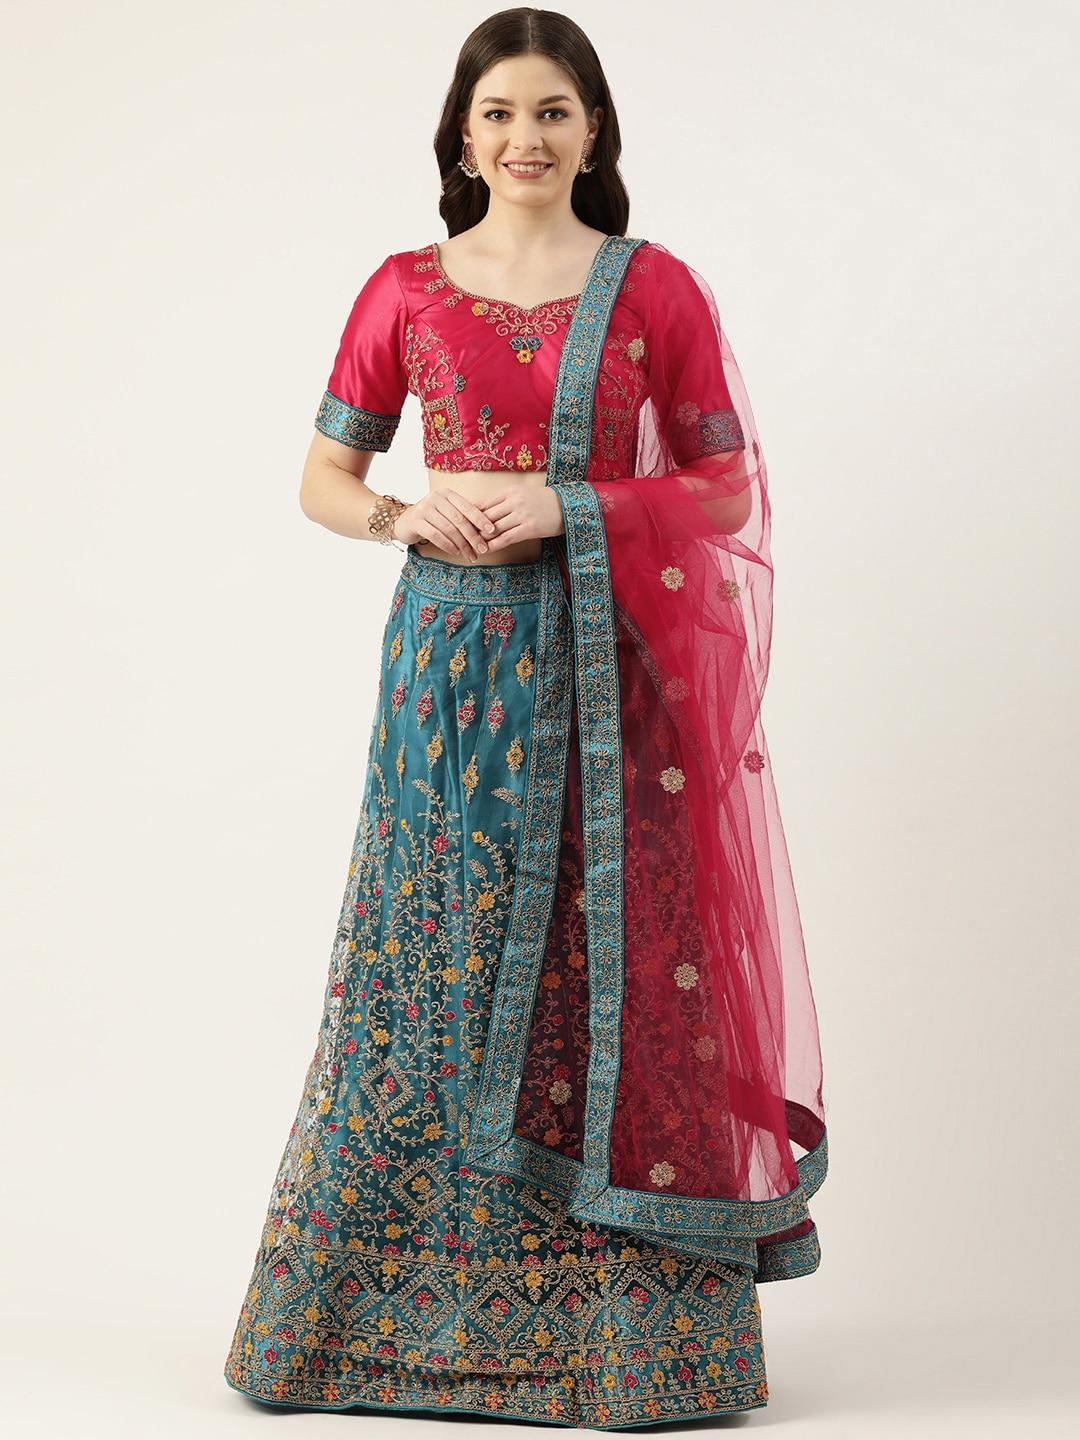 pothys-turquoise-blue-&-red-thread-work-unstitched-lehenga-&-blouse-with-dupatta